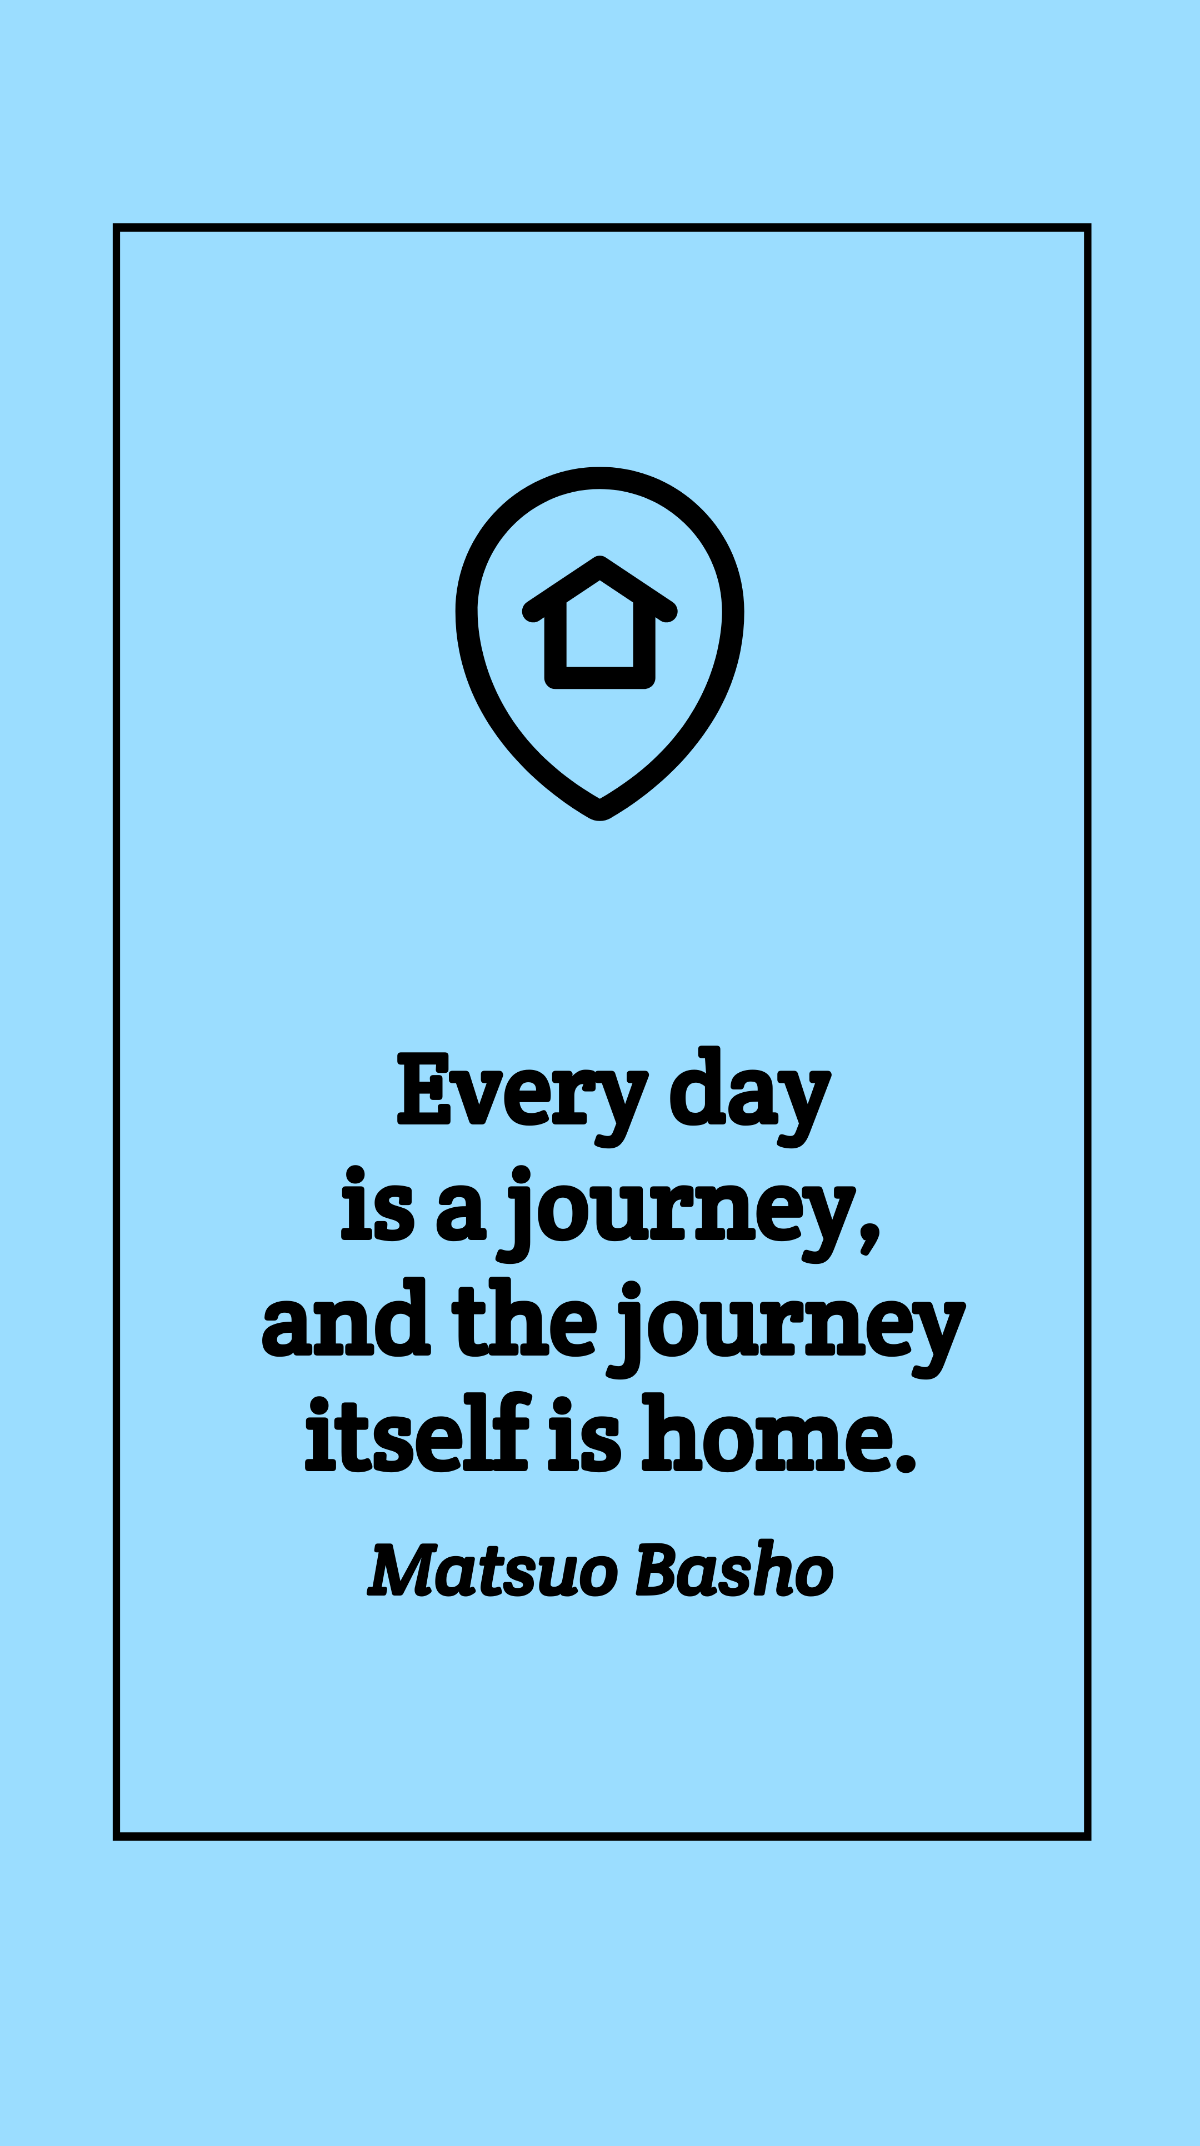 Matsuo Basho - Every day is a journey, and the journey itself is home.